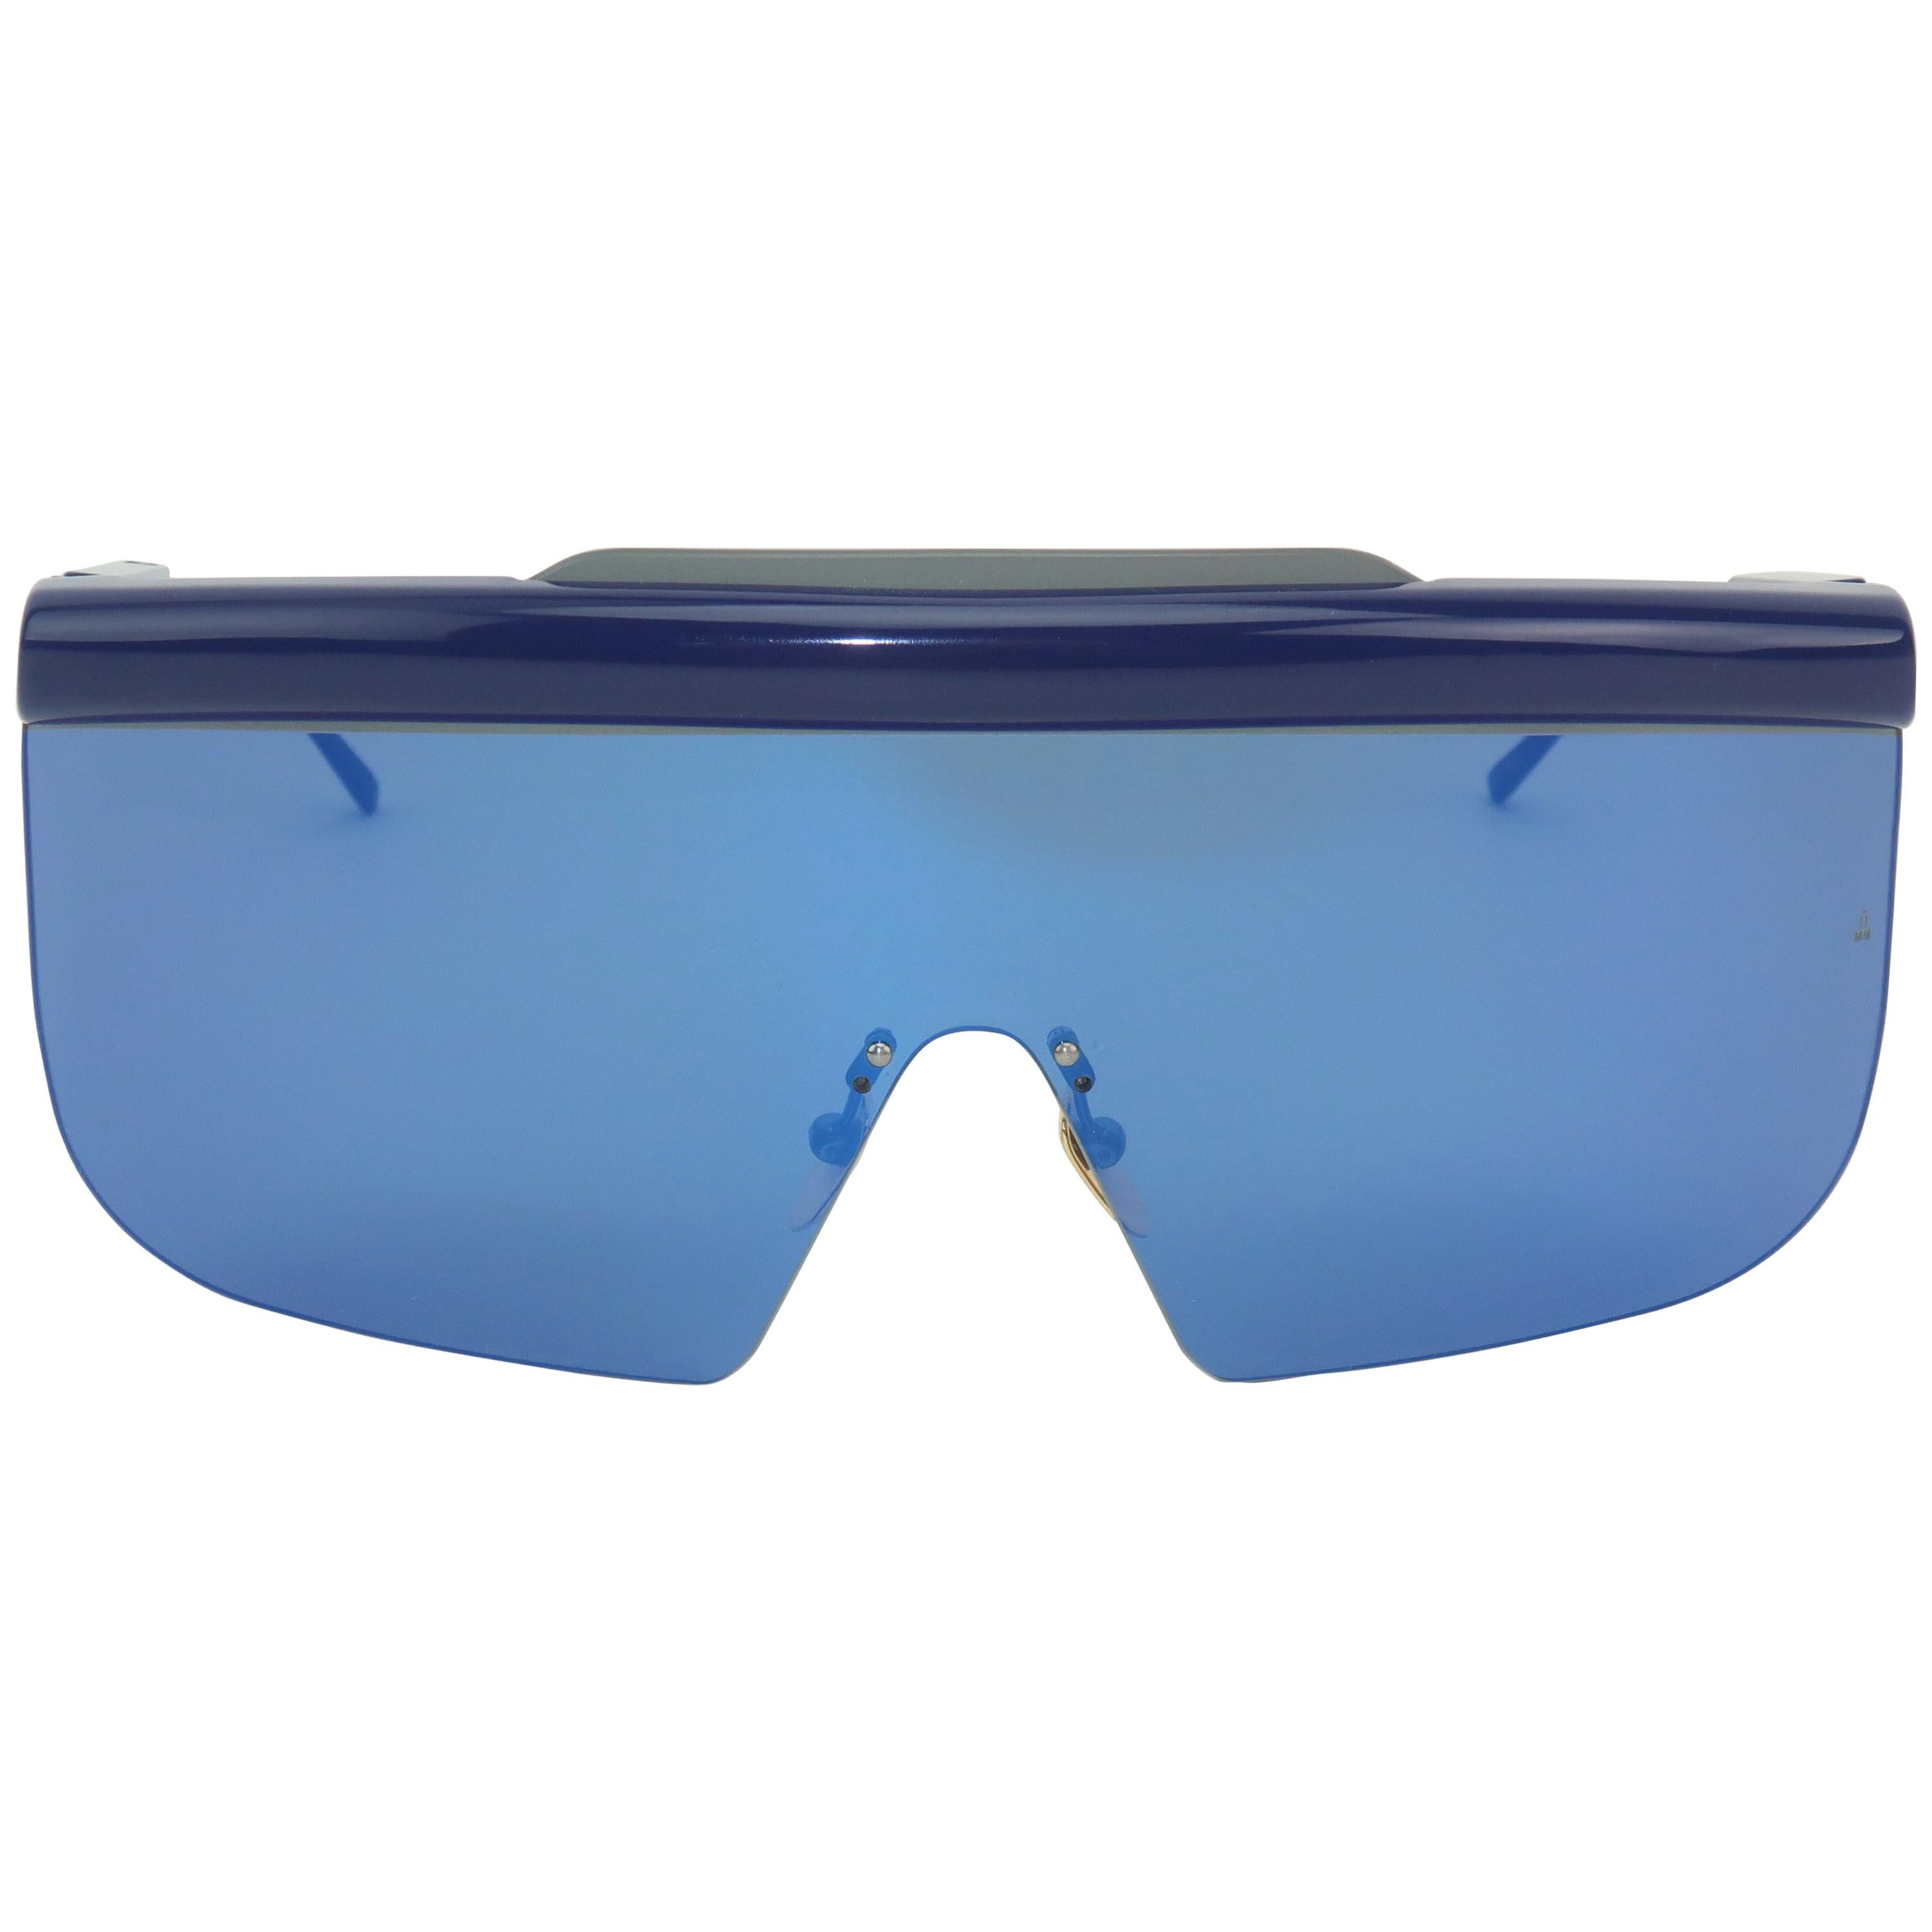 Jacques Marie Mage 'Connie' Space Age Blue Sunglasses